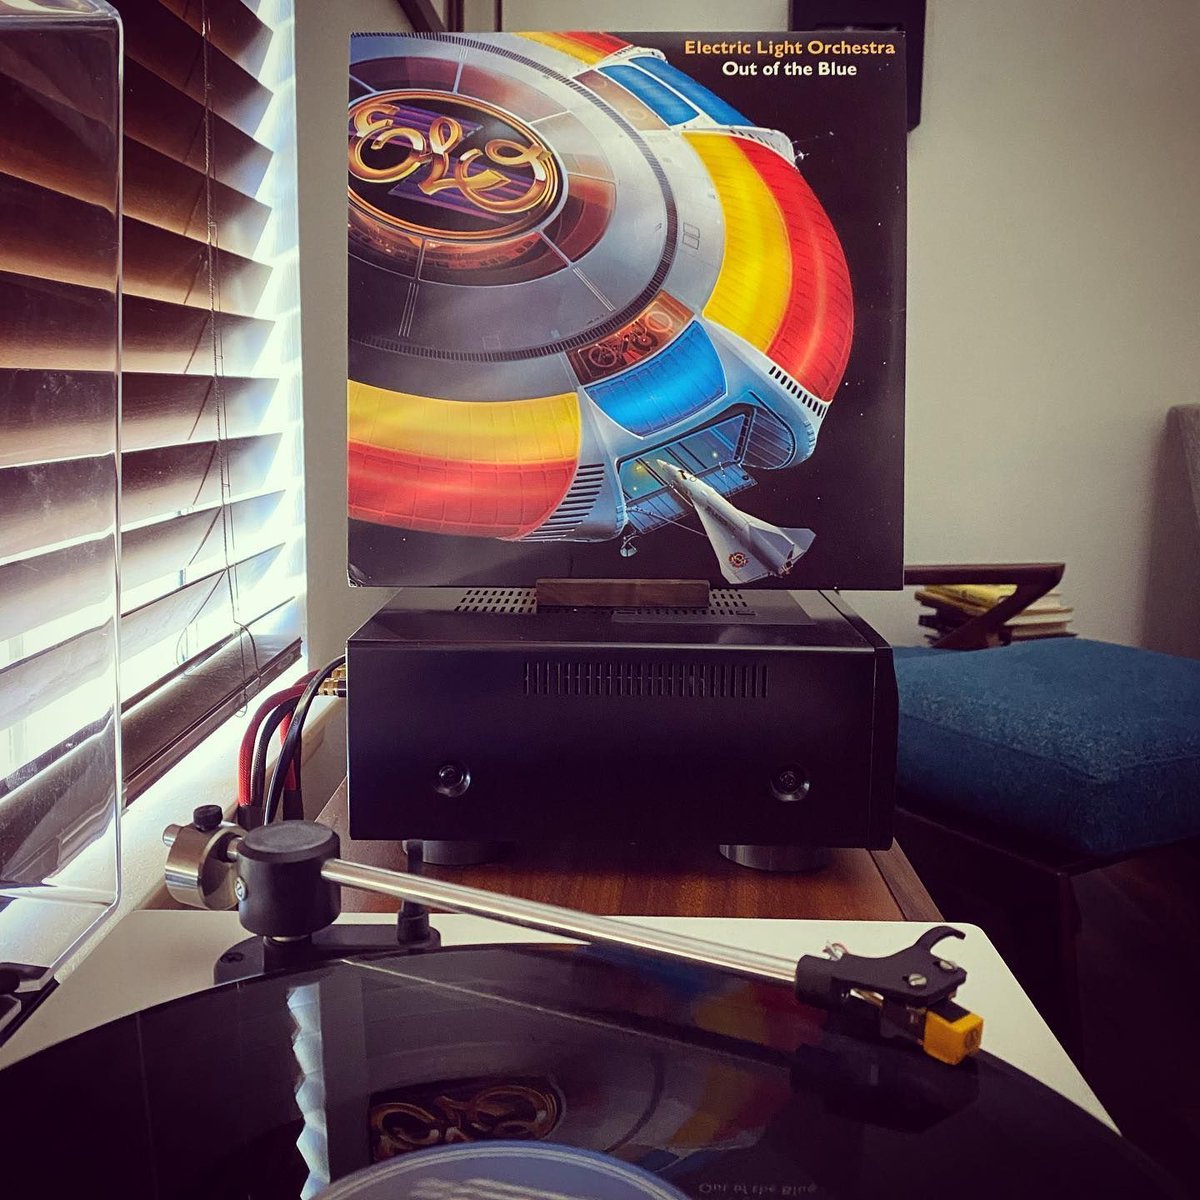 Floating on a cloud of classic tunes with Electric Light Orchestra's 'Out of the Blue' 🎼🌈✨ 

📸 ig: auralcandy 

#lovevinyl #vinylmusic #vinylcollectors #vinyllife #recordcollectionpost #recordlover #igvinyl #recordscollection #recordscollector #vinylrecords #instarecords